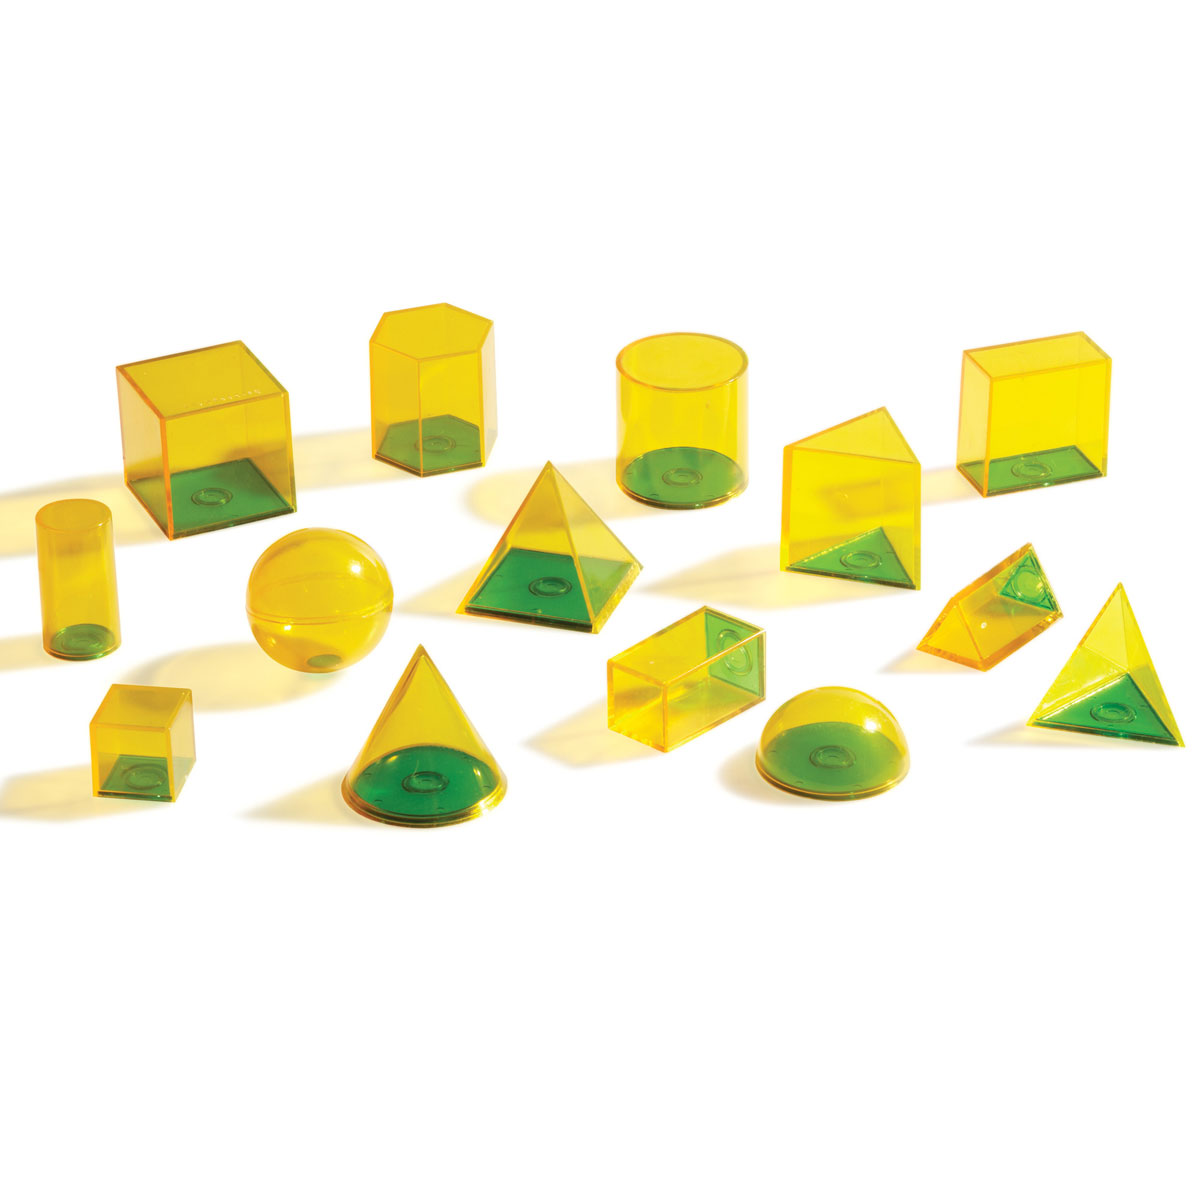 Details about   Learning Resources LER0918 Relational Geosolids Set of 14 clear plastic shapes